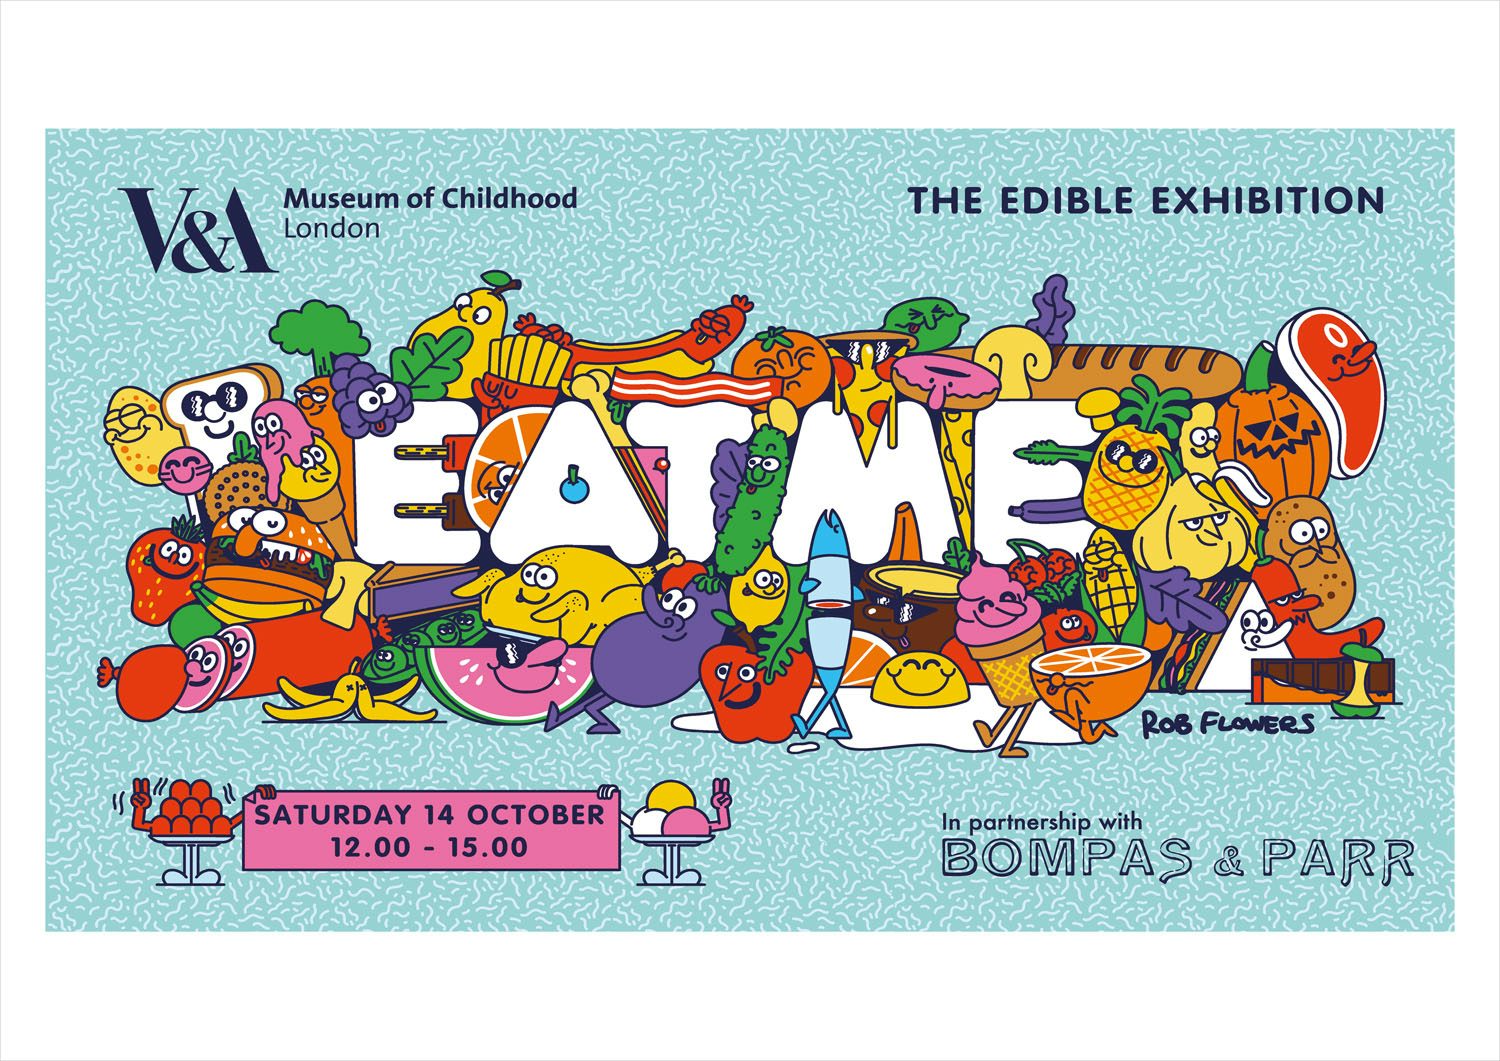 AMV BBDO and Rob Flowers' edible posters for the Museum of Childhood